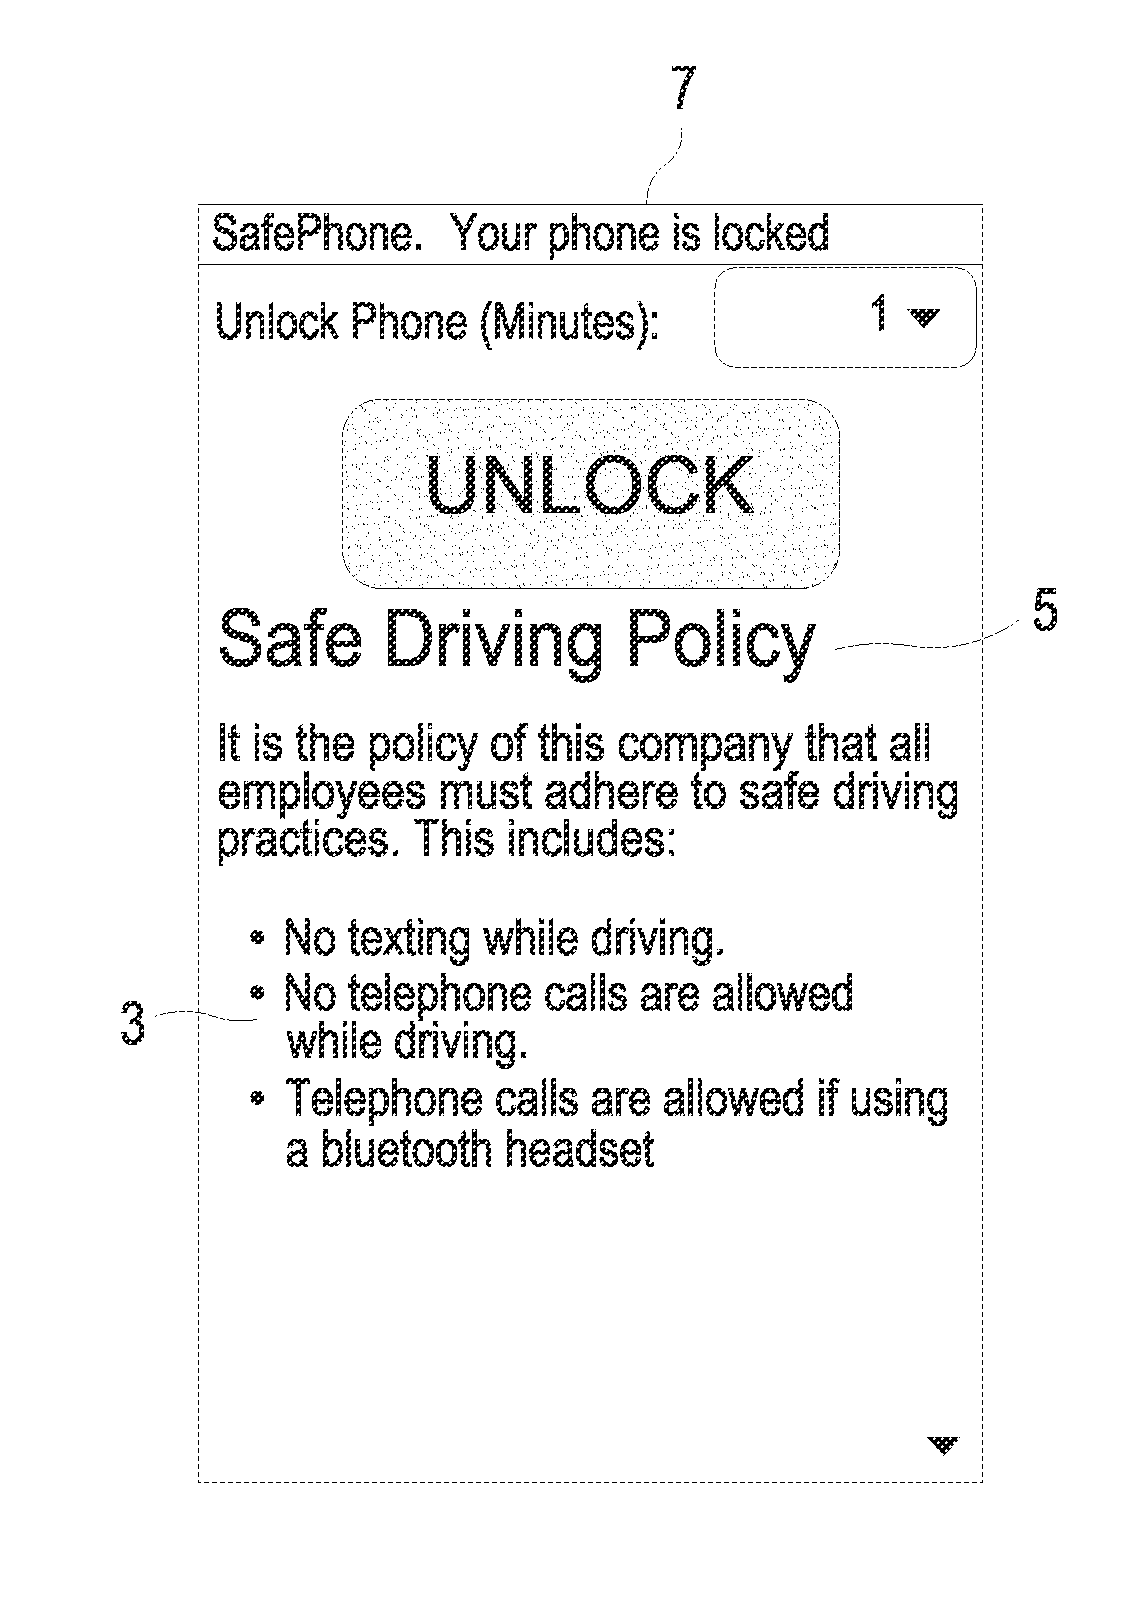 Mobile device tracking monitoring system and device for enforcing organizational policies and no distracted driving protocols